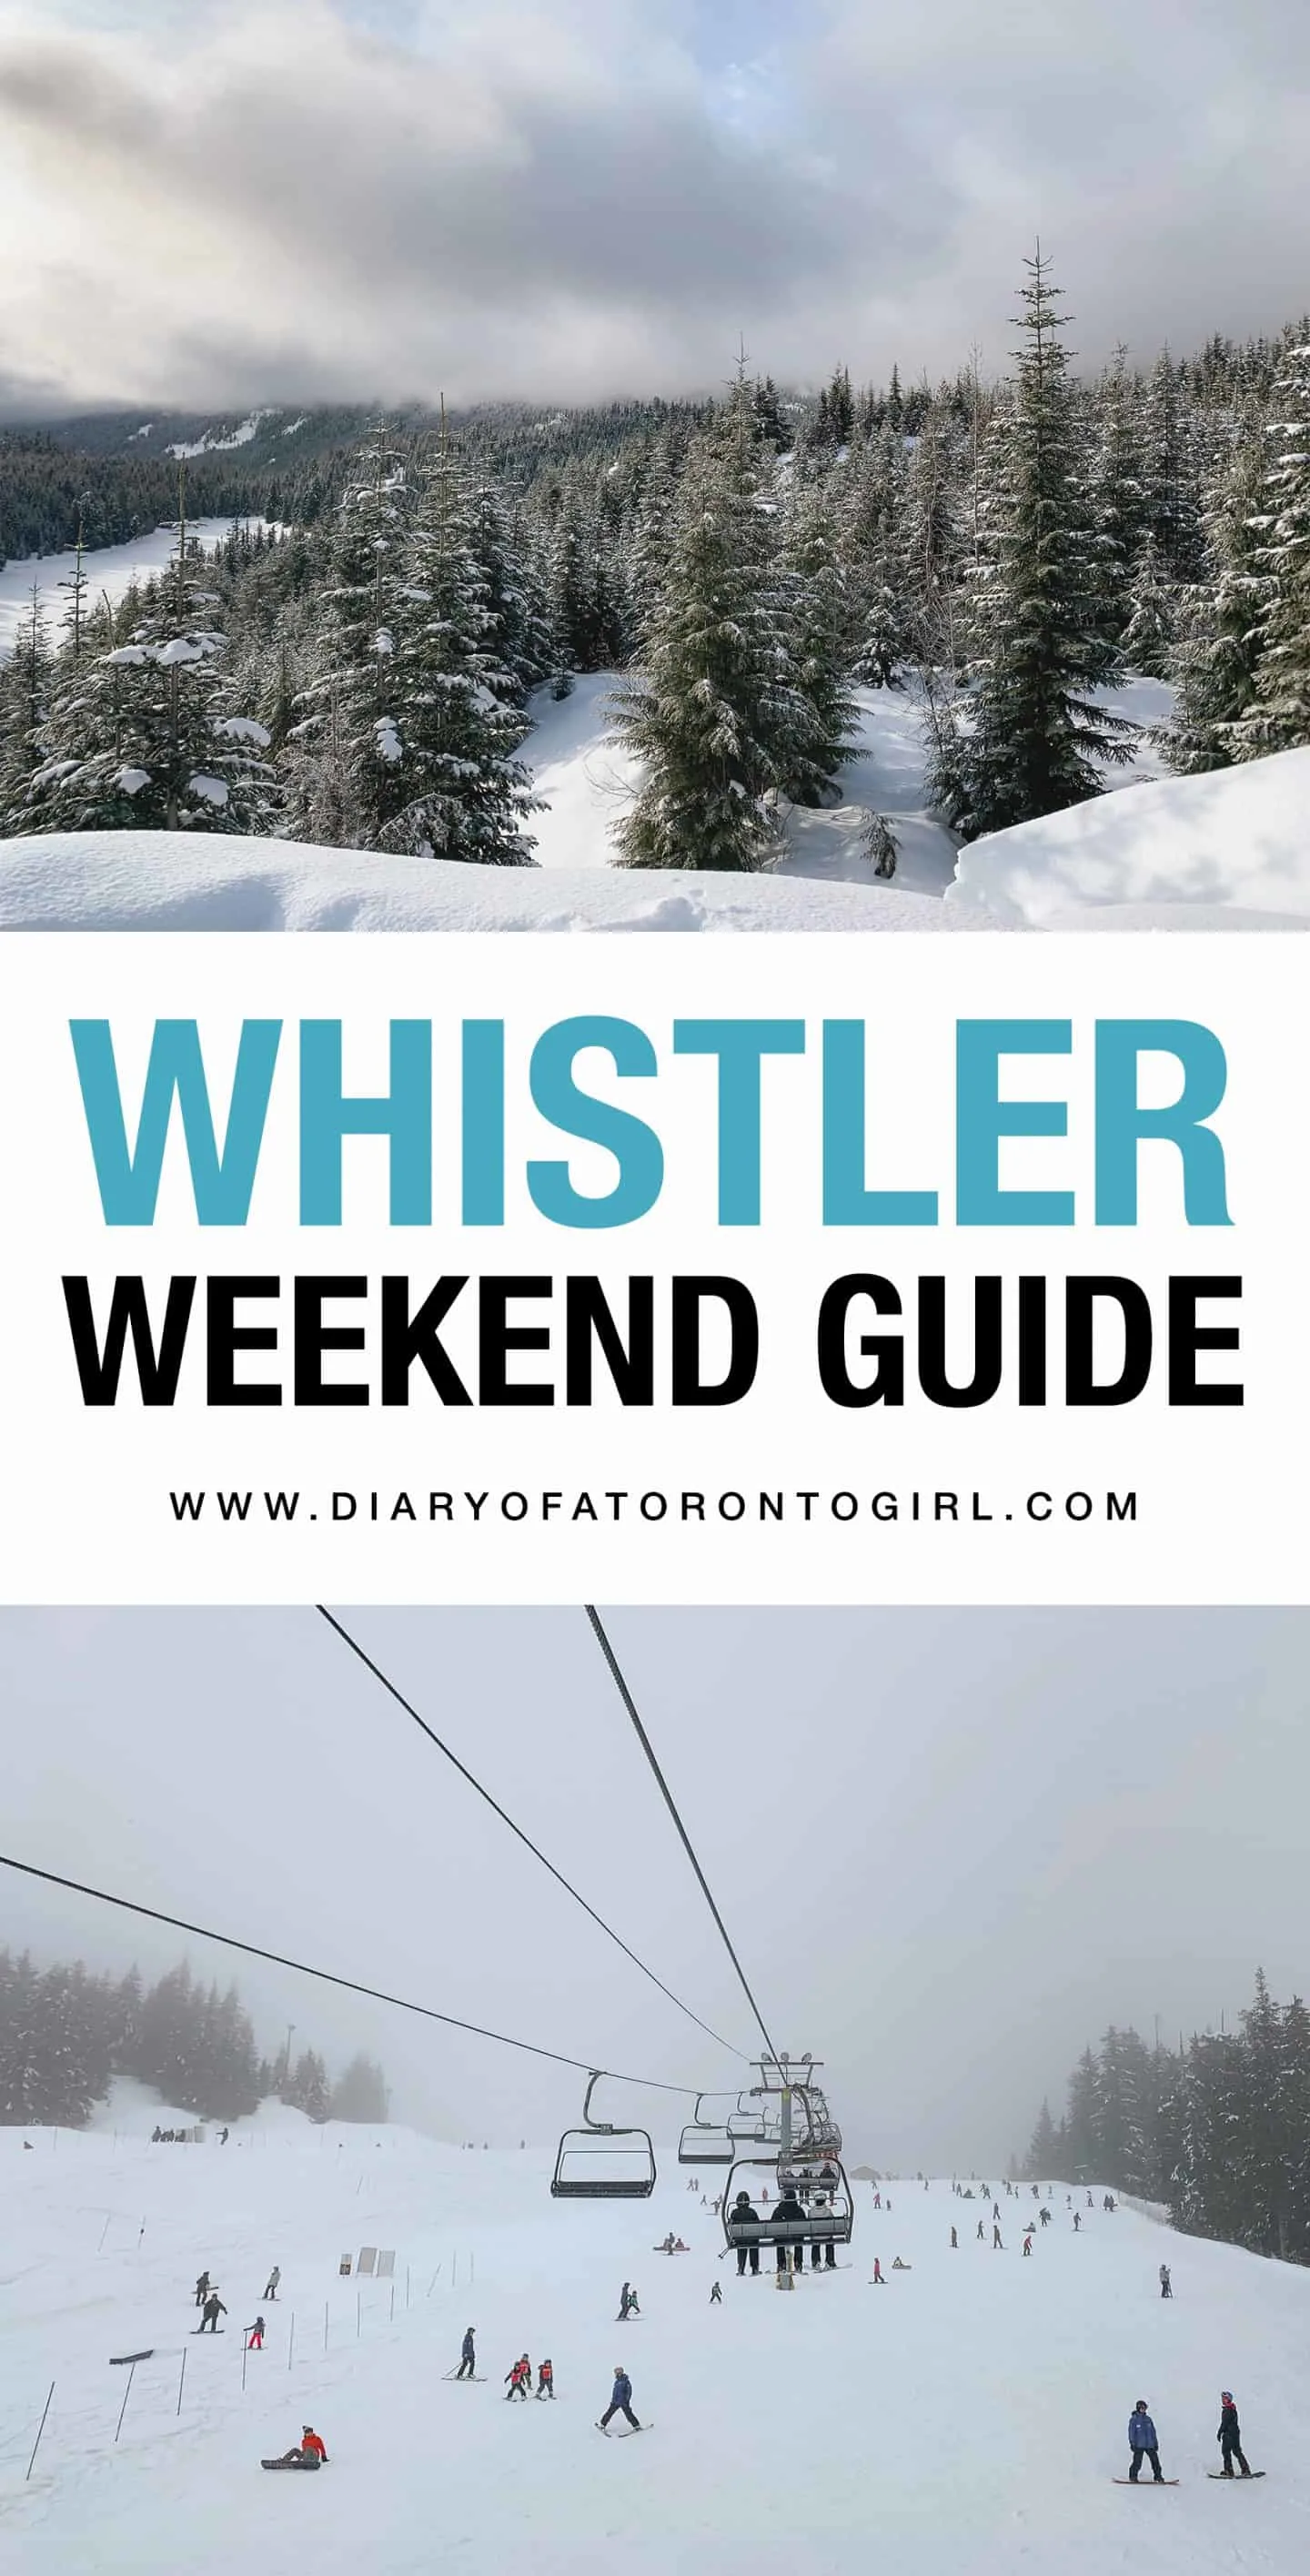 The ultimate guide on how to spend a winter weekend in Whistler, British Columbia!